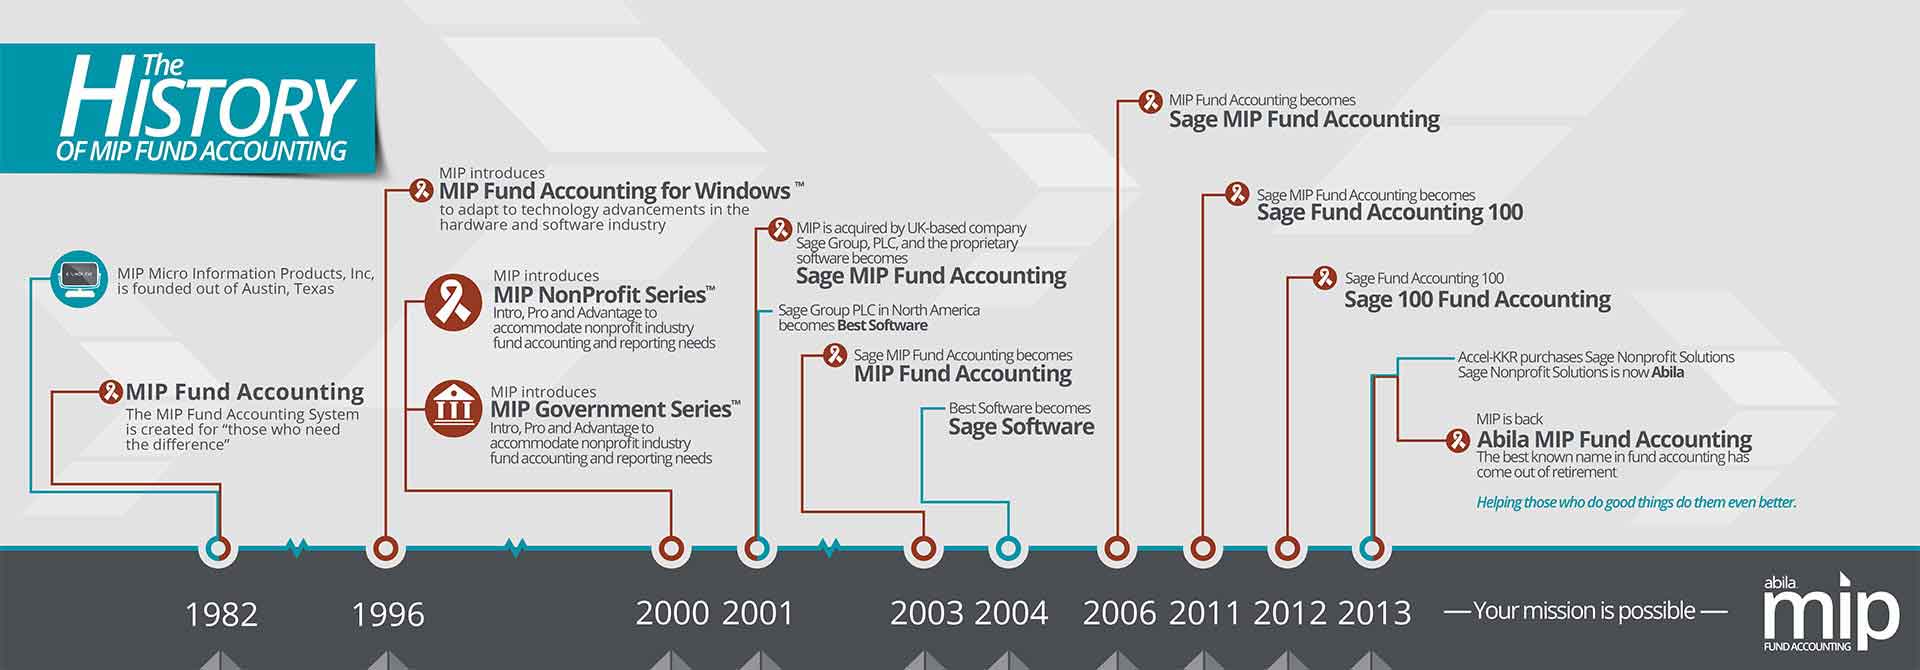 The History of MIP Fund Accounting Infographic